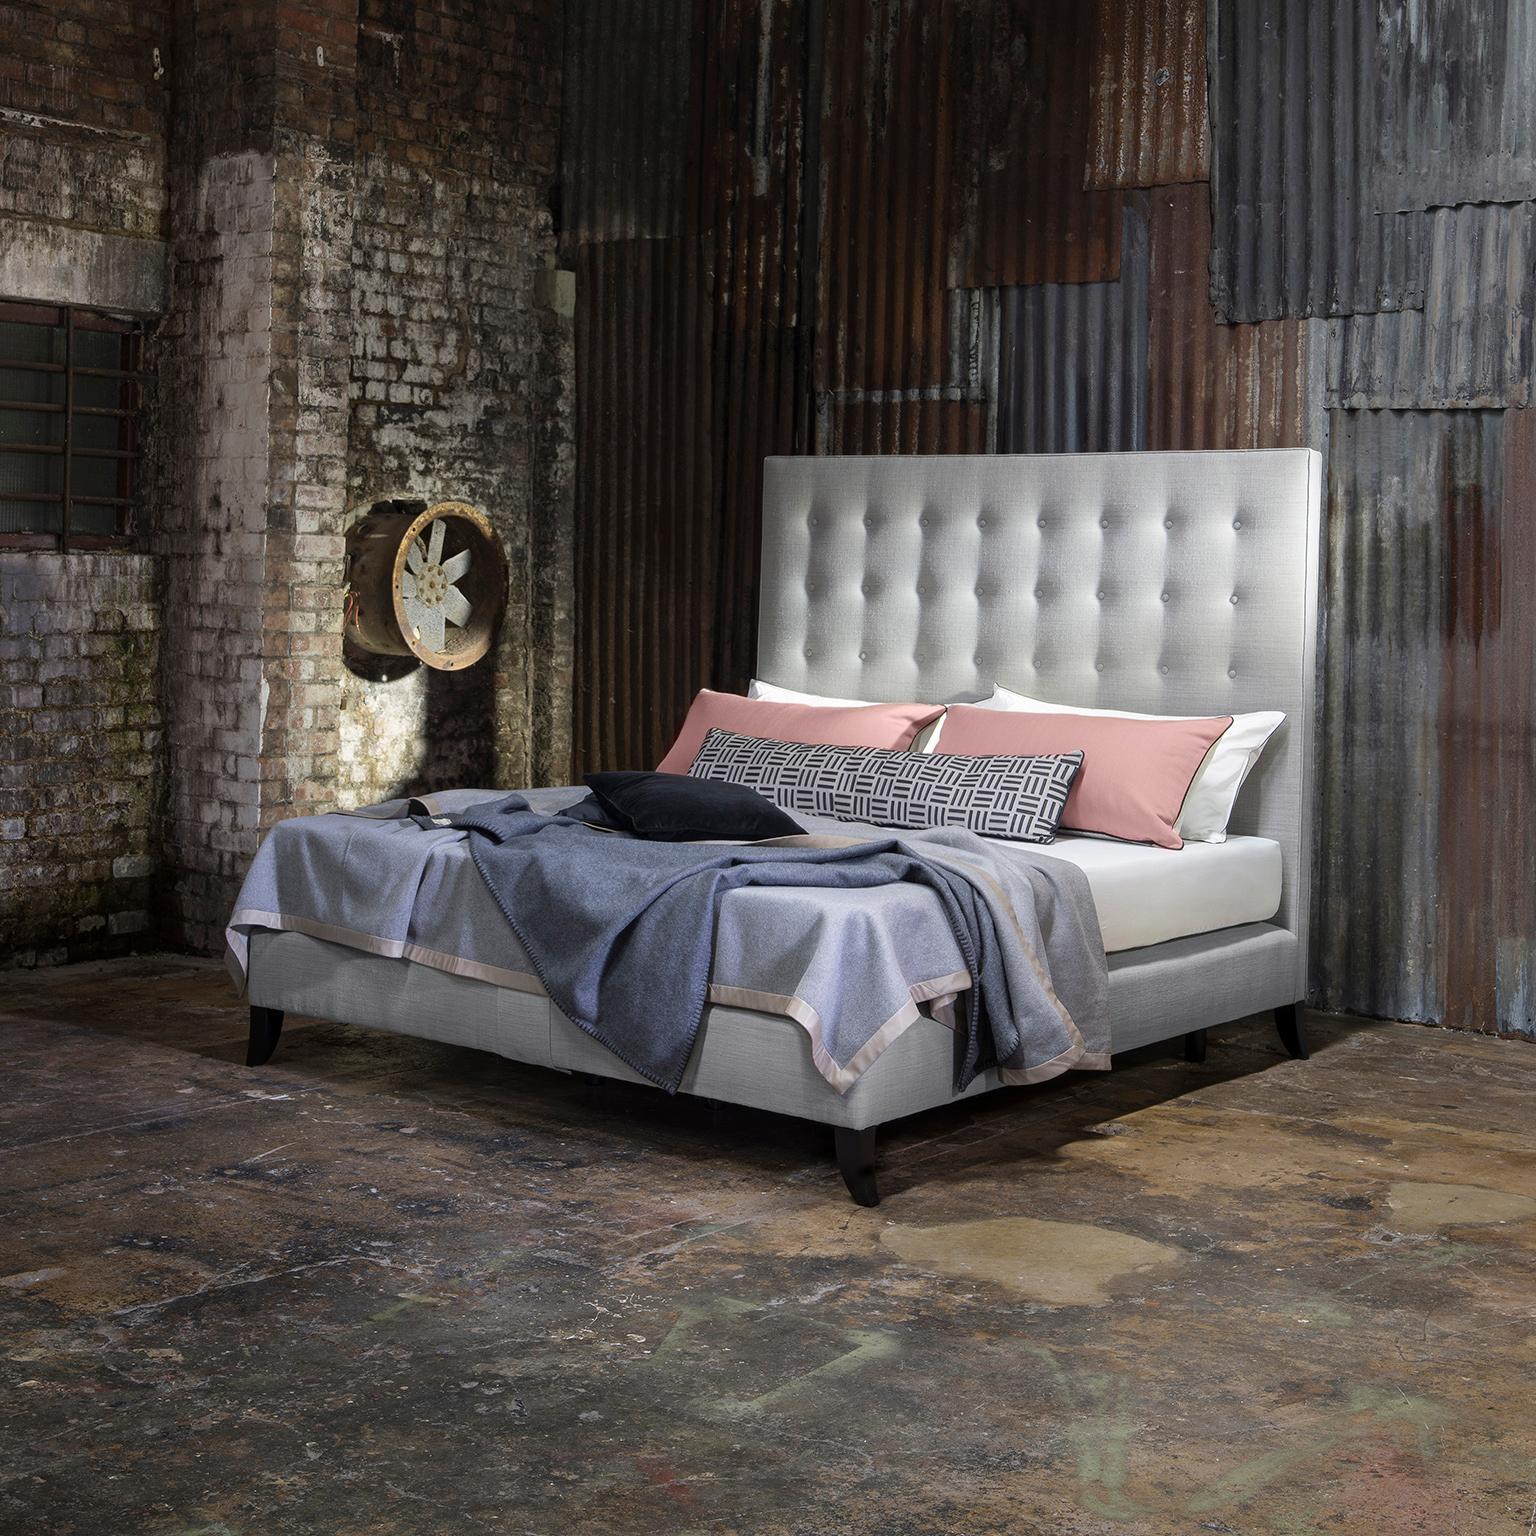 Featuring a statement headboard with classic styling, the Holly bed oozes timeless style. The oversized headboard with its restrained buttoning and piped edge embraces a modern metropolitan feel. Upholstered in subtle textured grey linen from Mark